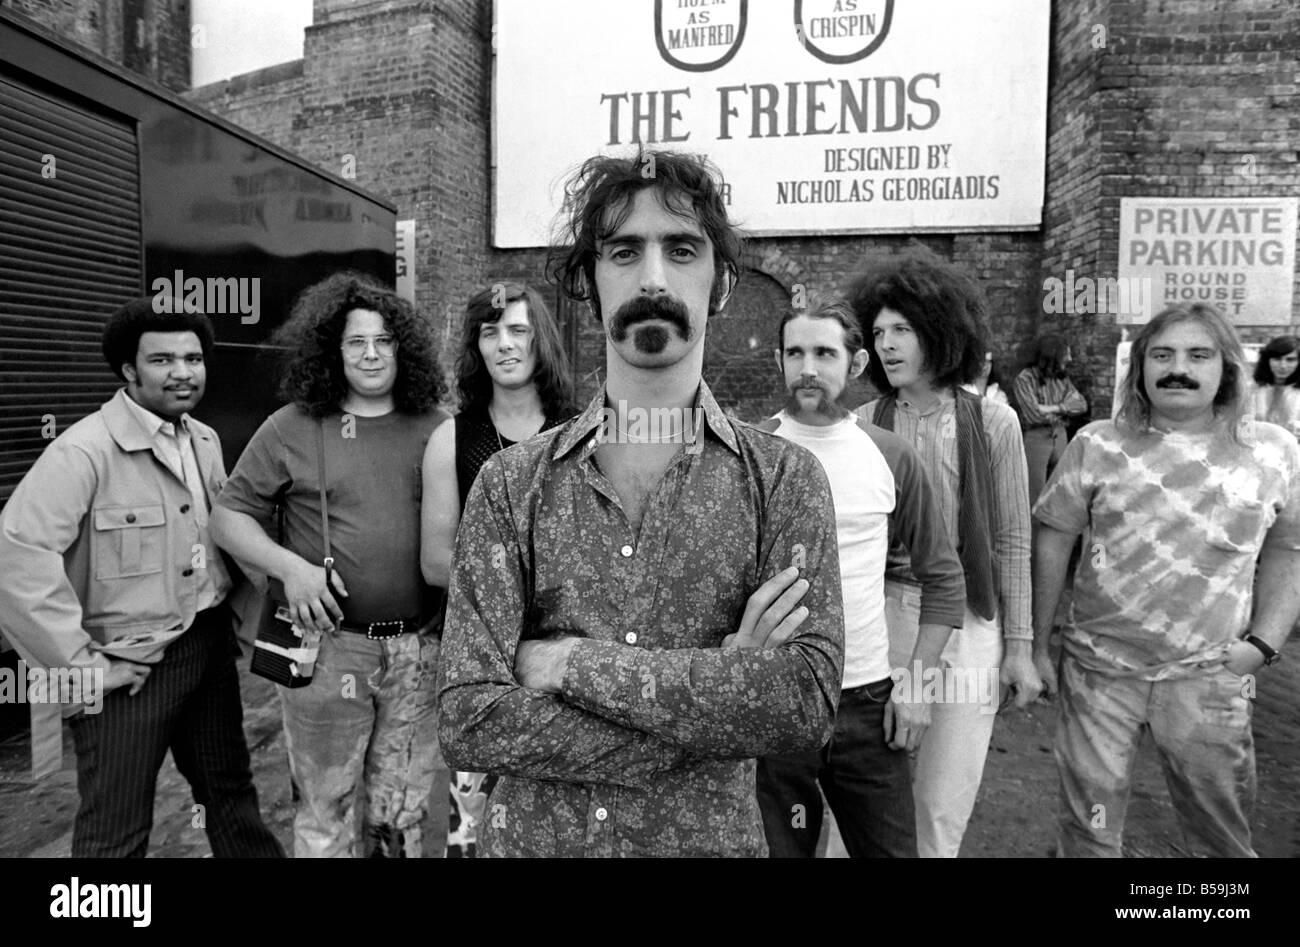 Frank Zappa. Another American rock group hits London town: Frank Zappa and his outfit the Mothers of Invention are at present on tour in the U.K. next weekend they visit the Bath Pop Festival. Yesterday Sunday they saw some of the sights of London, which included a visit to the Round House Entertainment Centre in Camden town. The boys hail from Los Angels: Frank Zappa (foreground), George Duke, Ian Underwood, Jeff Simmons, Mark Volman, Howard Kalen and Aynsley Dunbar. June 1970 70-5893 Stock Photo